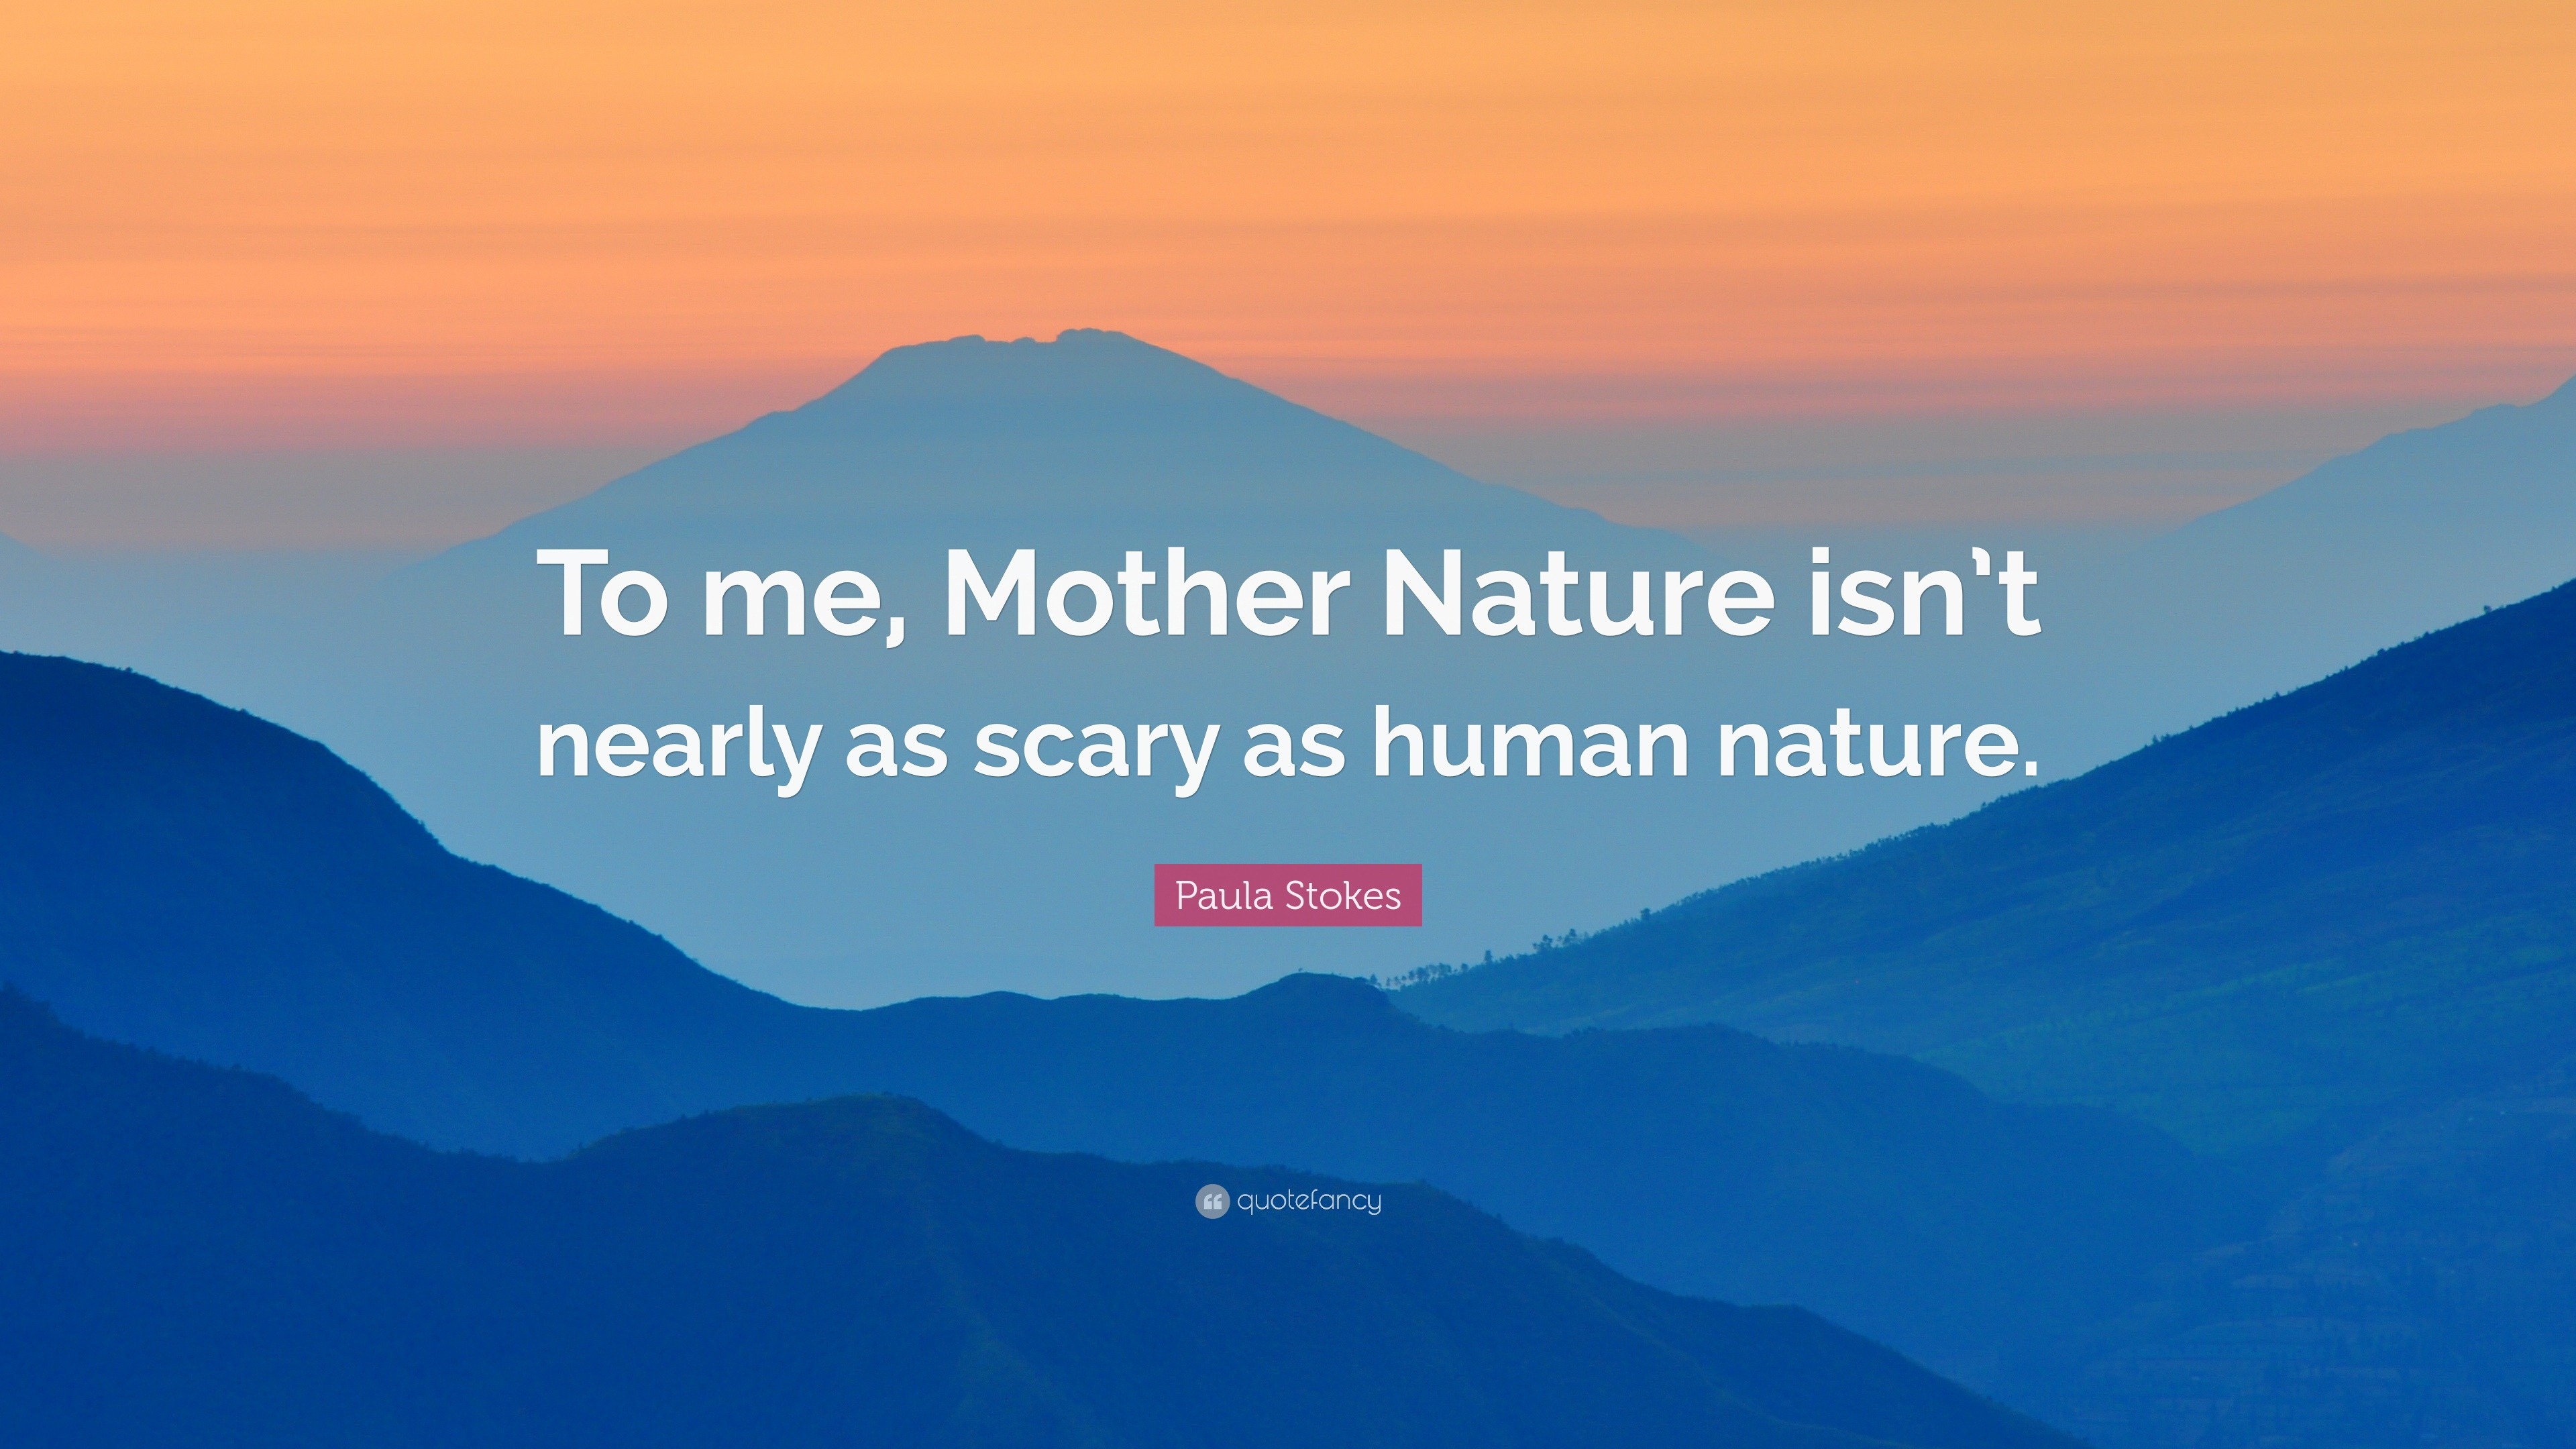 Paula Stokes Quote: “To me, Mother Nature isn’t nearly as scary as ...